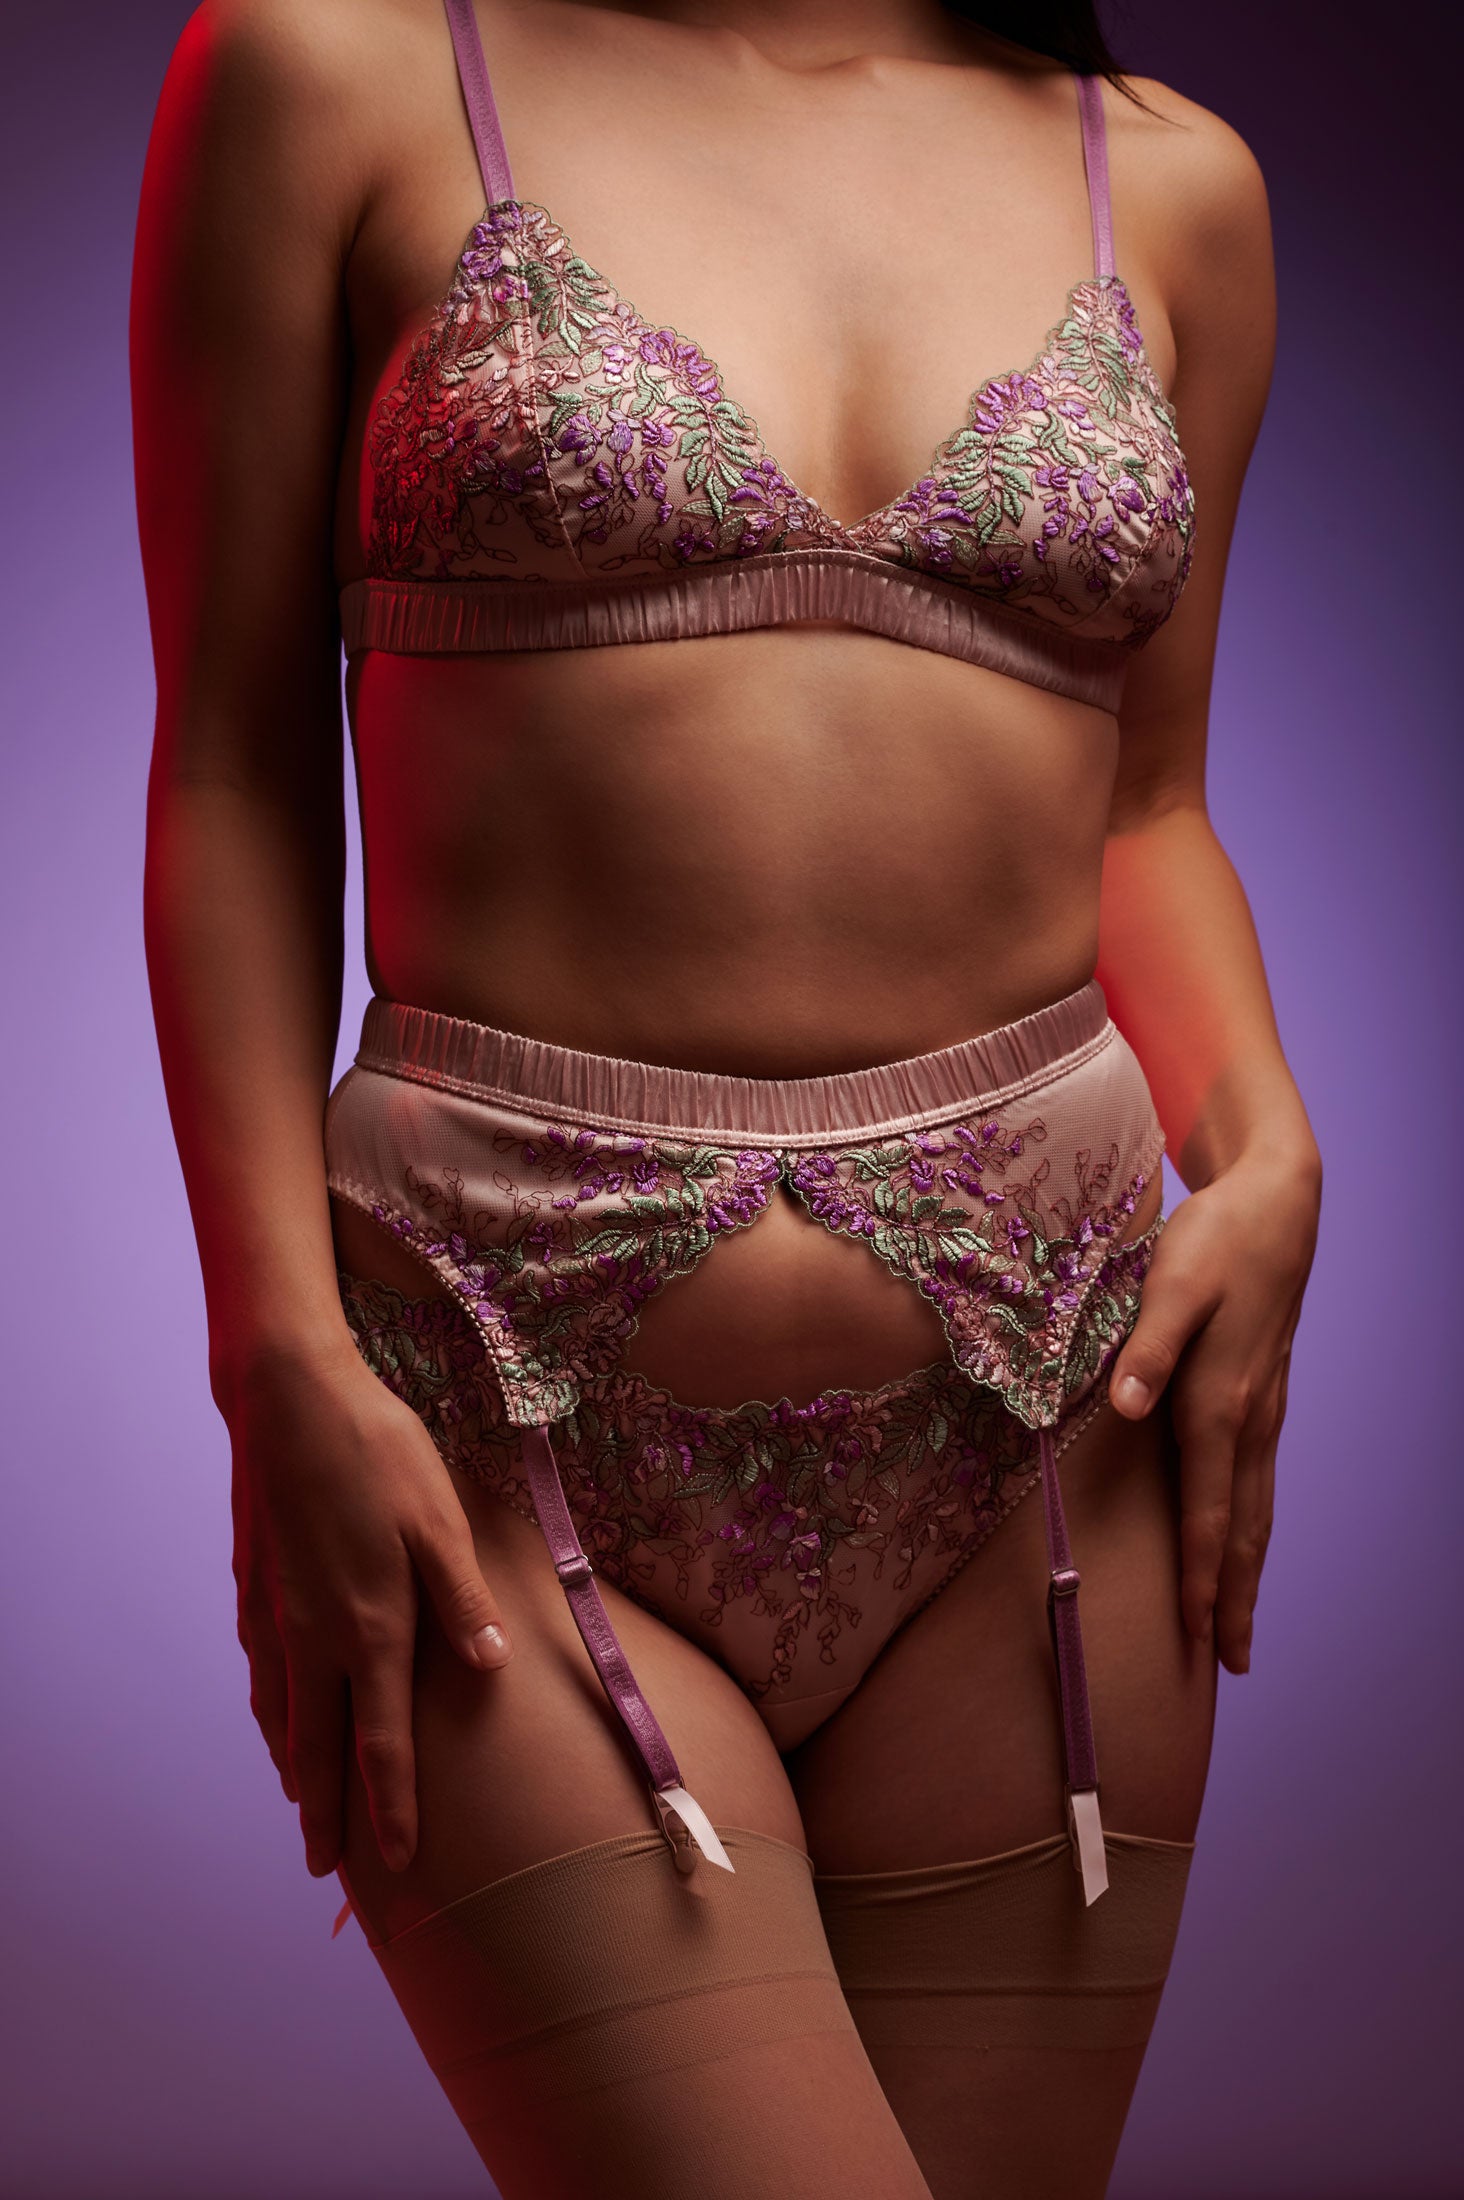 Wisteria lingerie set with a pink floral bralette and embroidered silk underwear